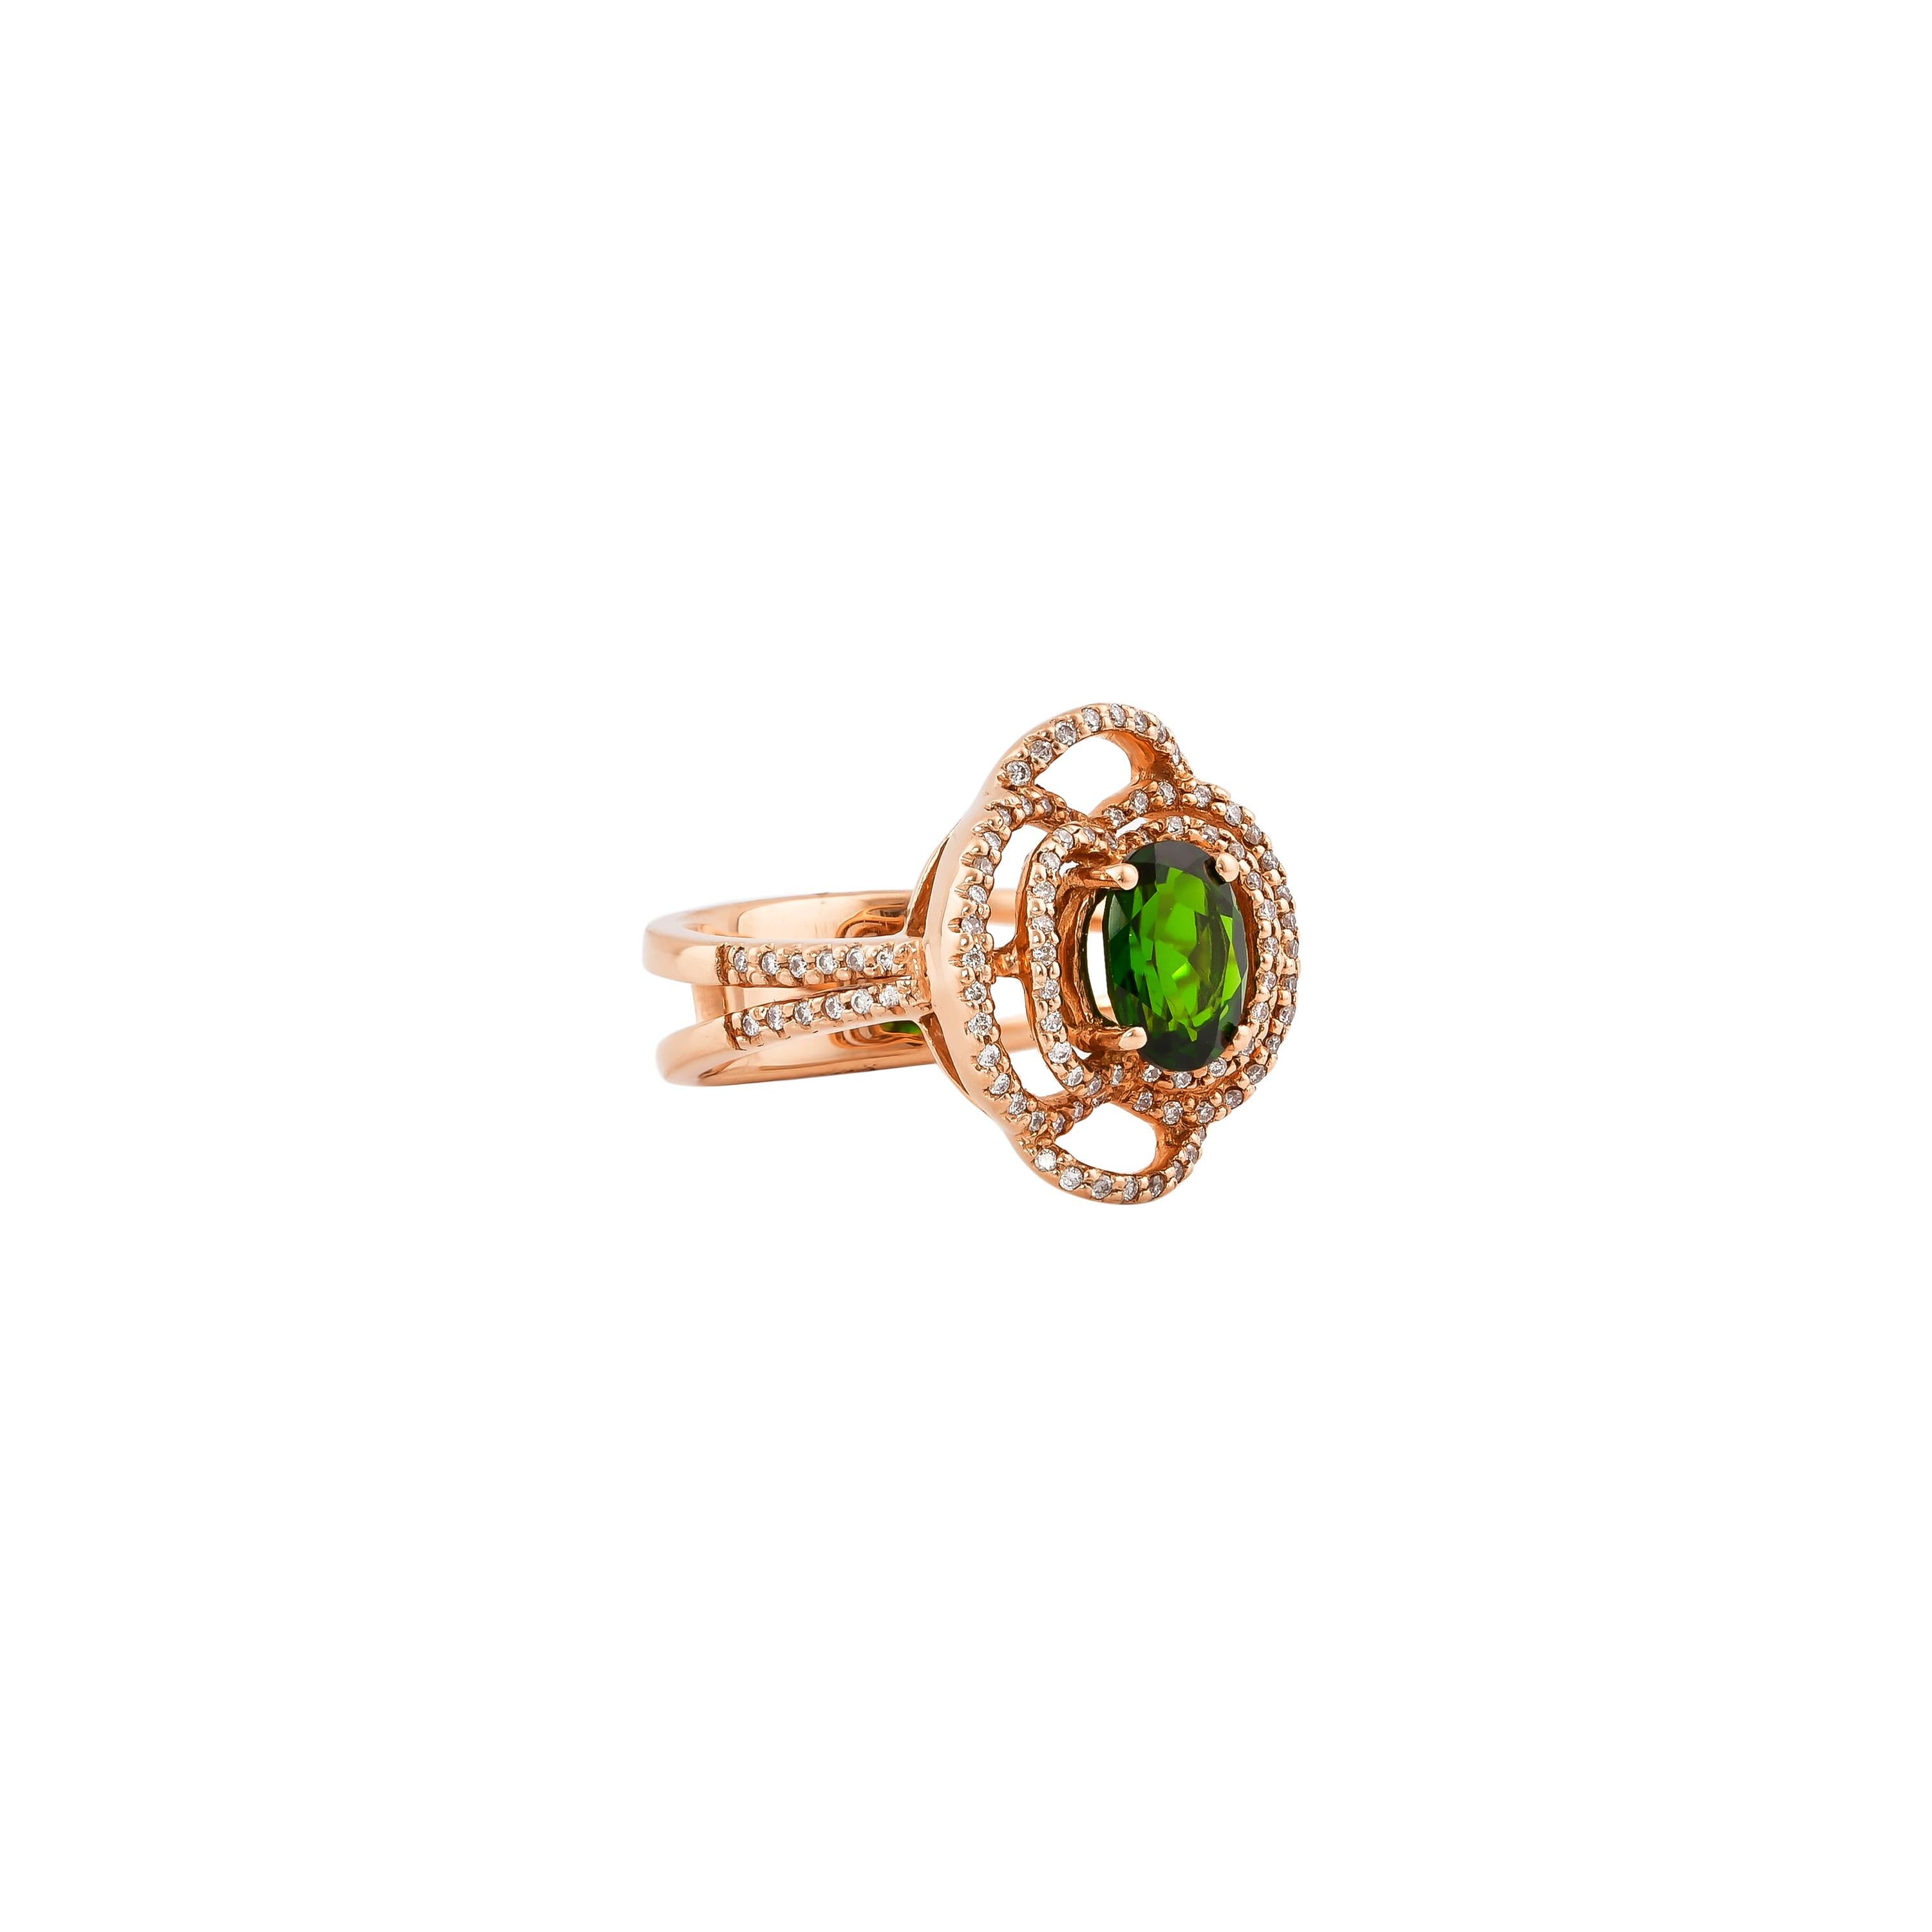 Unique and Designer Cocktail Rings by Sunita Nahata Fine Design.

Classic Chrome Diopside ring in 14K Rose gold with Diamond. 

Chrome Diopside: 1.143 carat, 6X8mm size, oval shape.
Diamond: 0.459 carat, 0.90mm size, round shape, G colour, VS